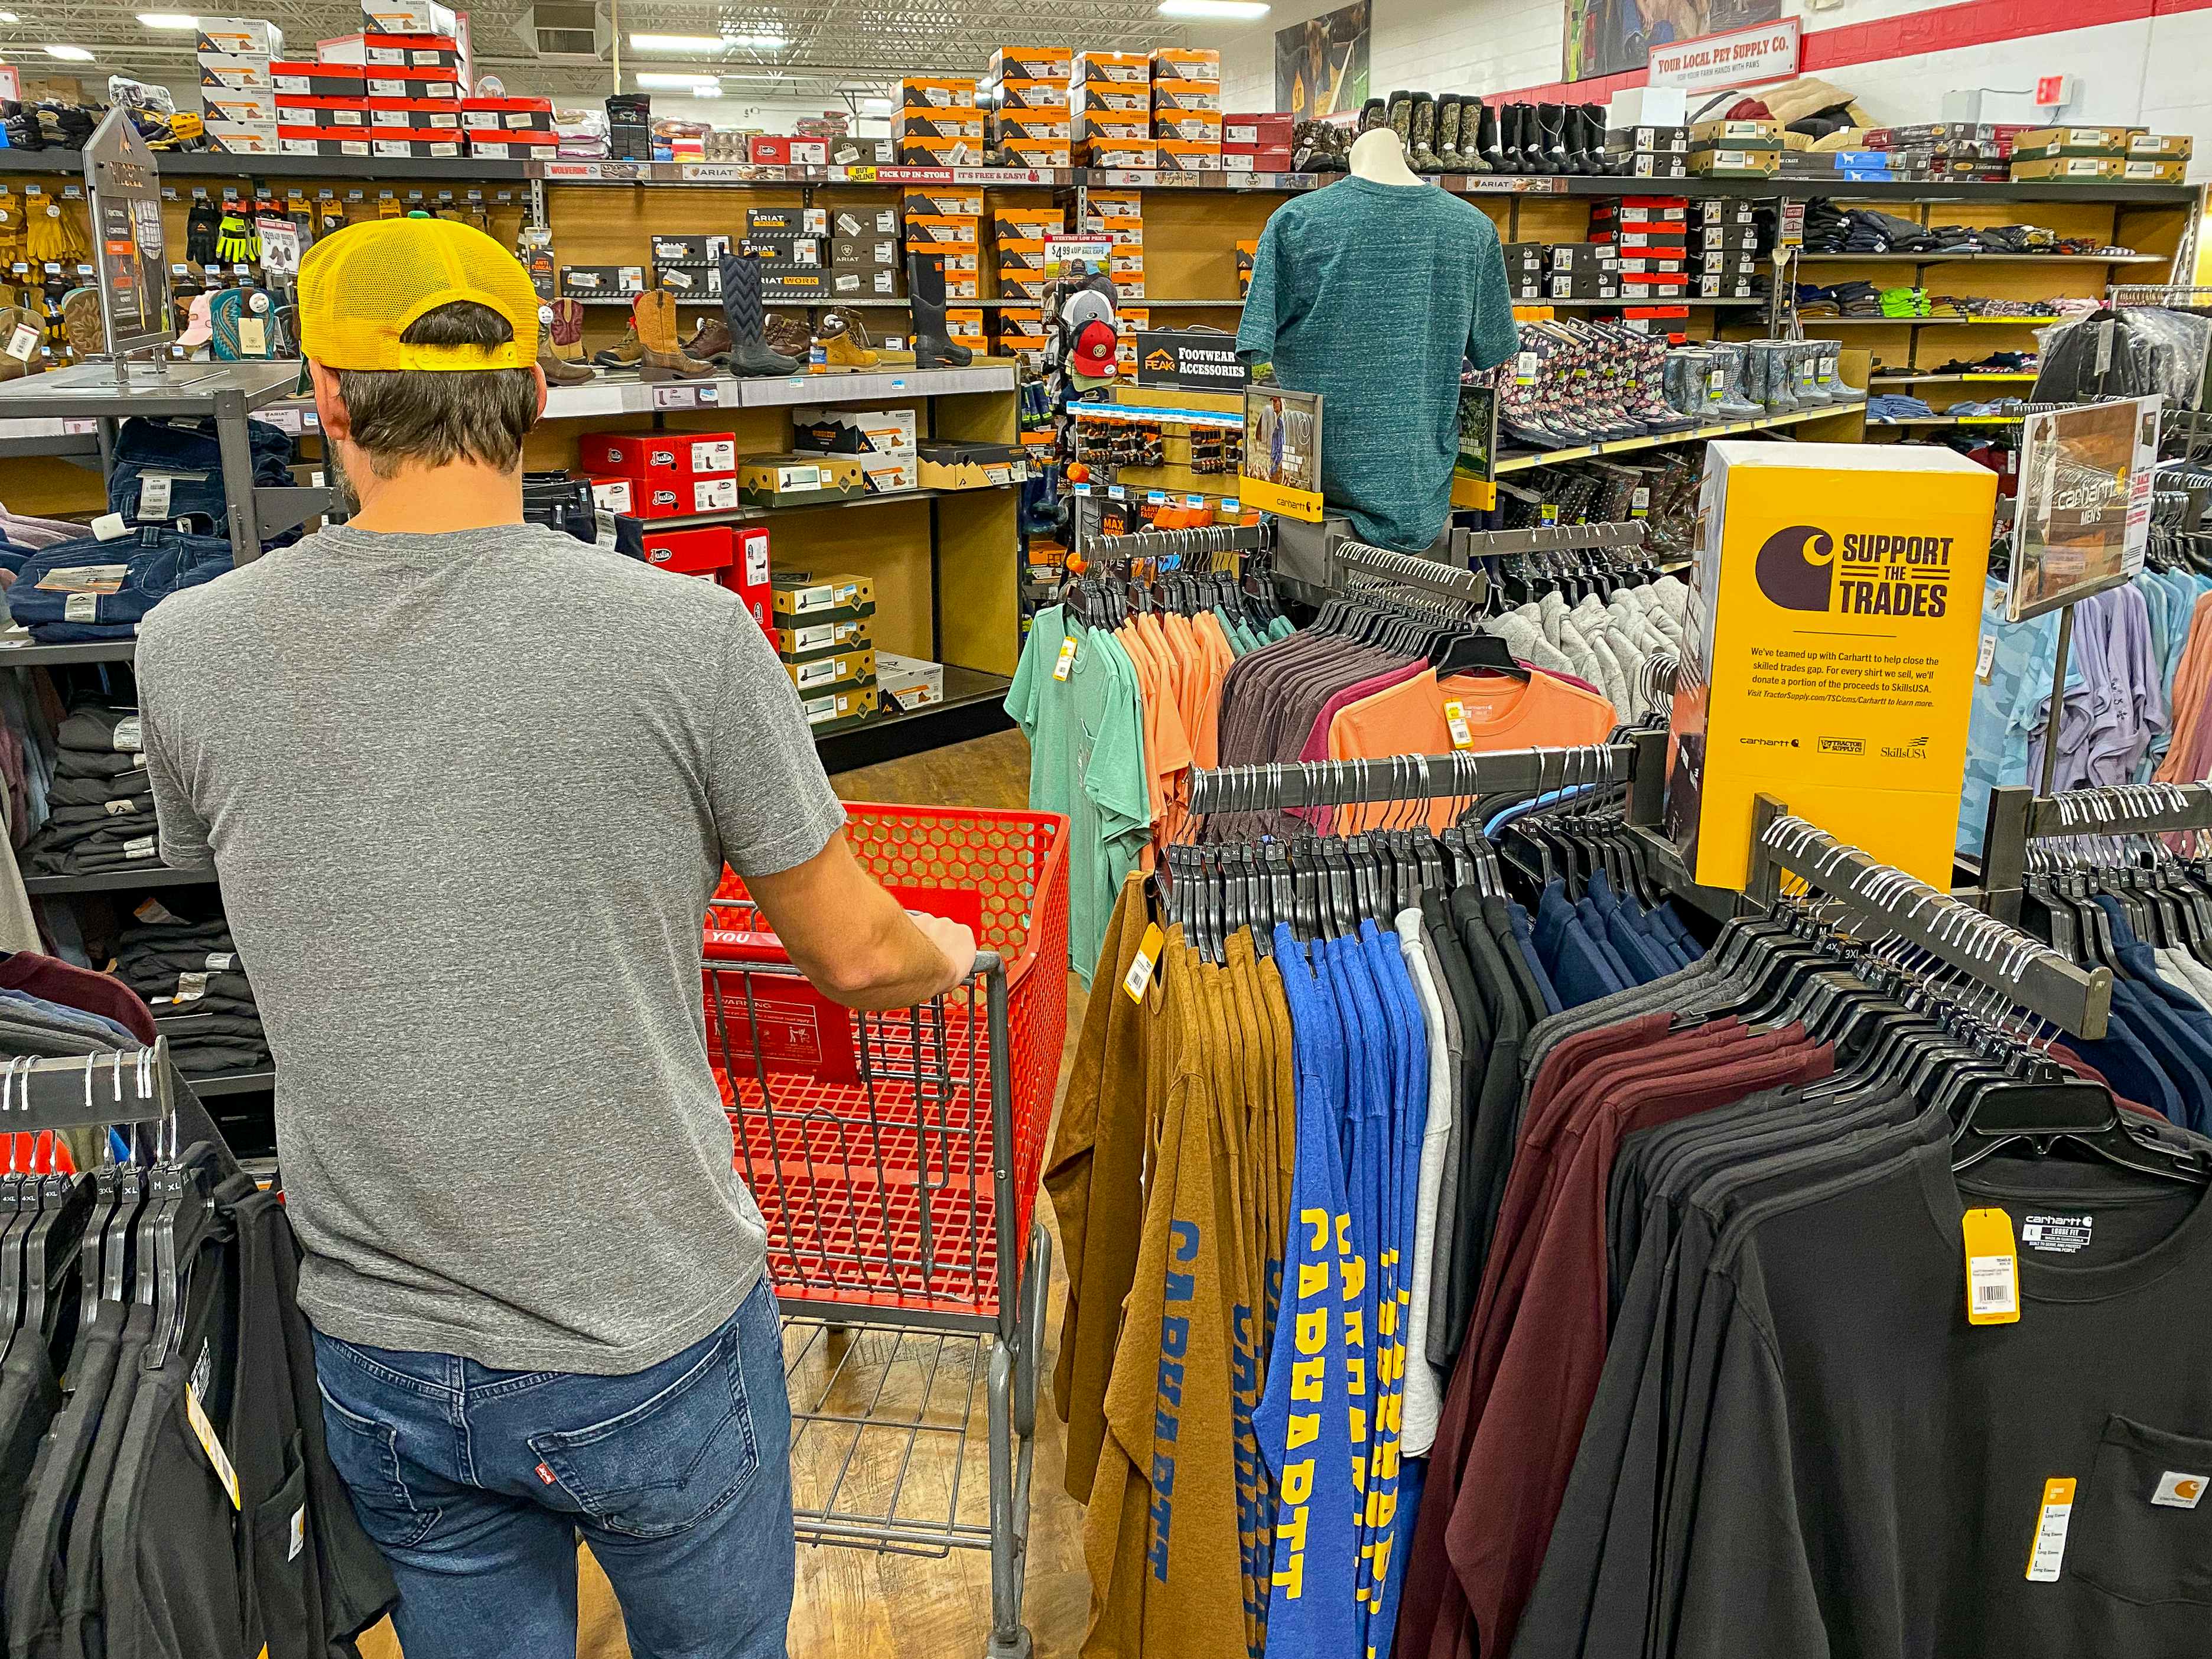 A man shopping in the men's apparel section of Tractor Supply.